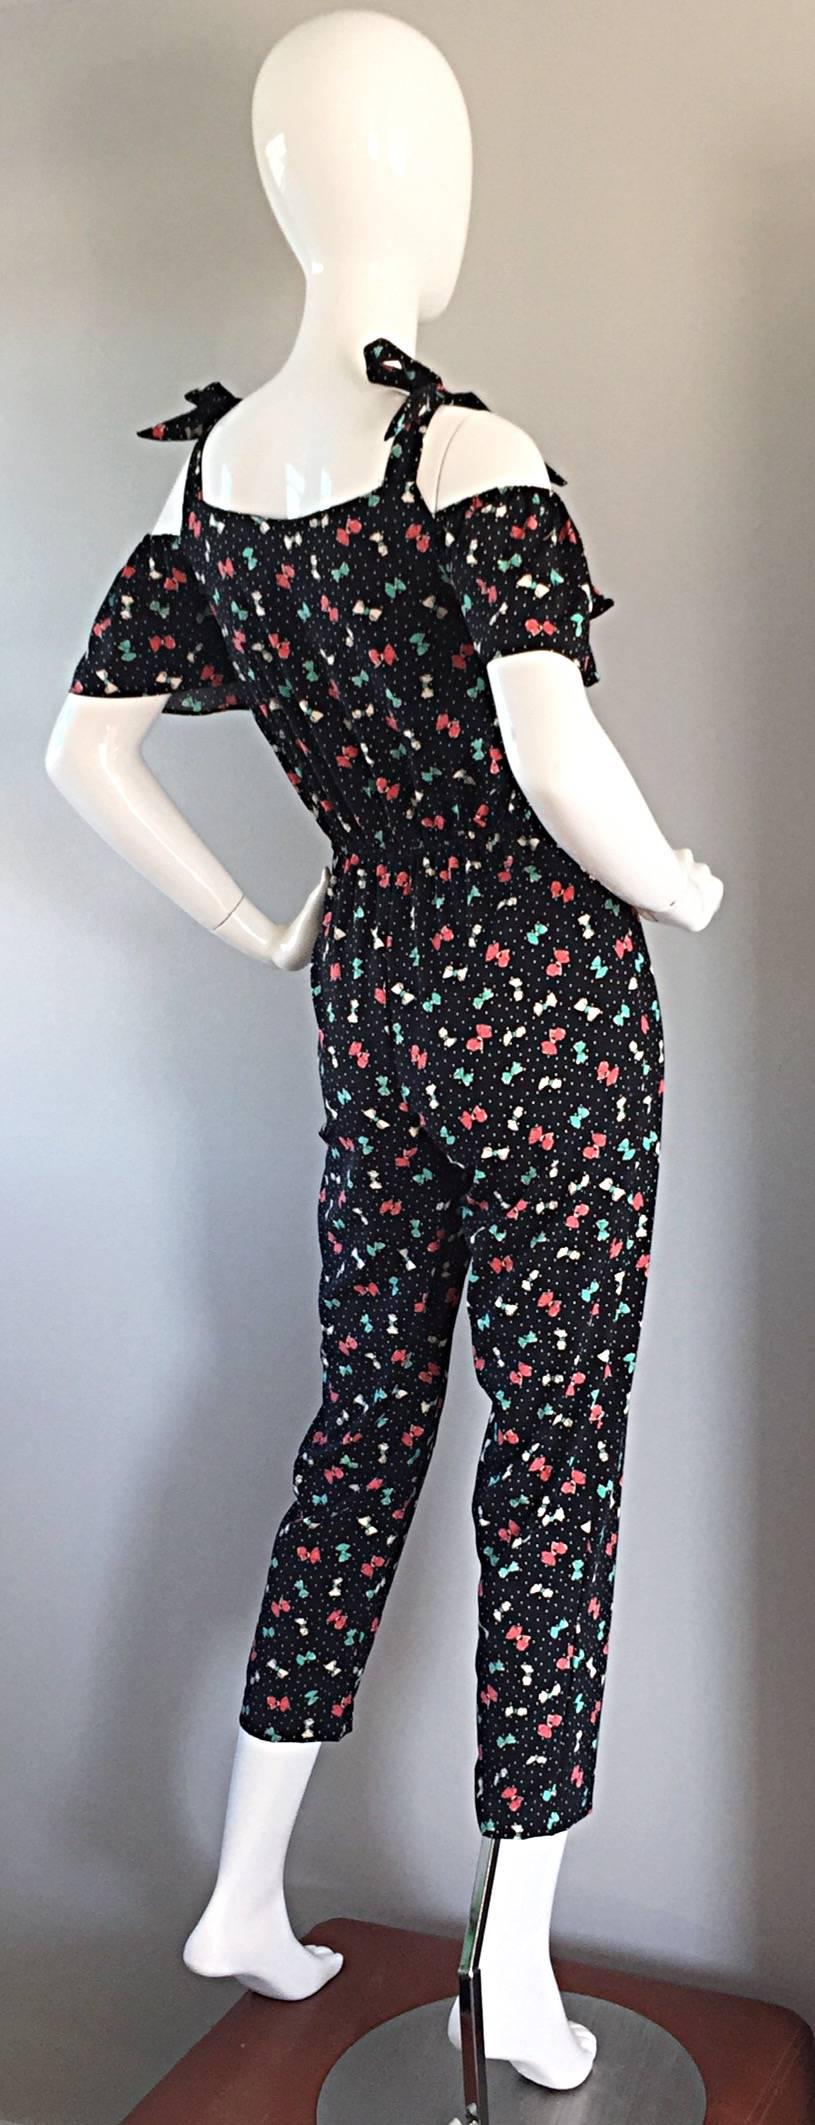 Incredible vintage 1980s does 1950s bombshell jumpsuit! Whimsical prints of colorful bows, with white pin-dot / polka dots, on a black background. Ruffles at bust. Can be worn a number of ways---with a halter neck, or with bows tied at each